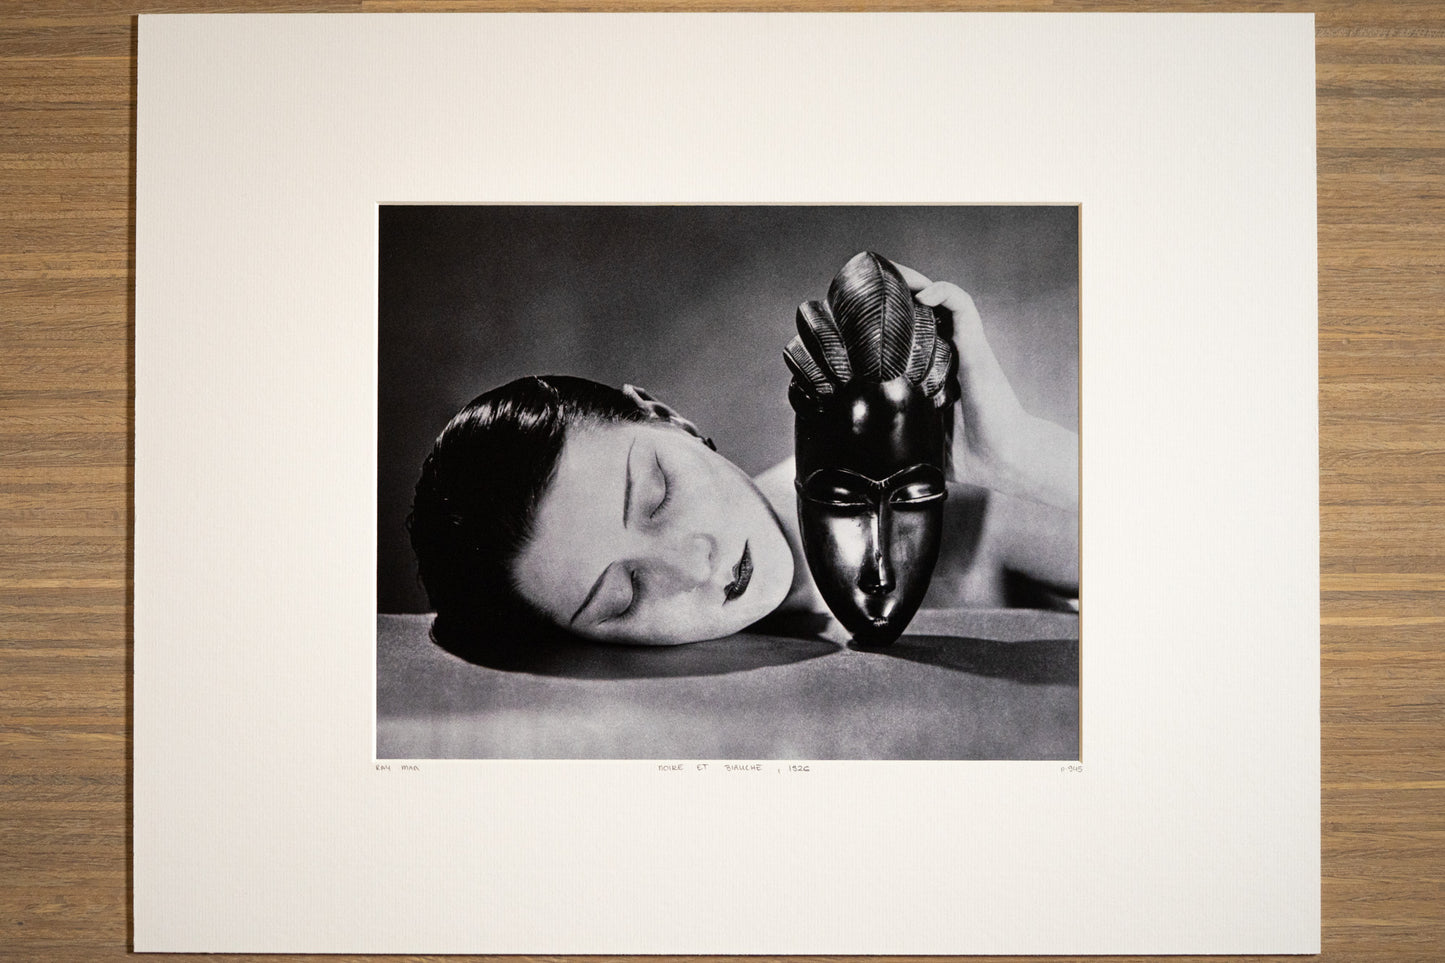 Man Ray Black and White, 1926 - Out of print edition